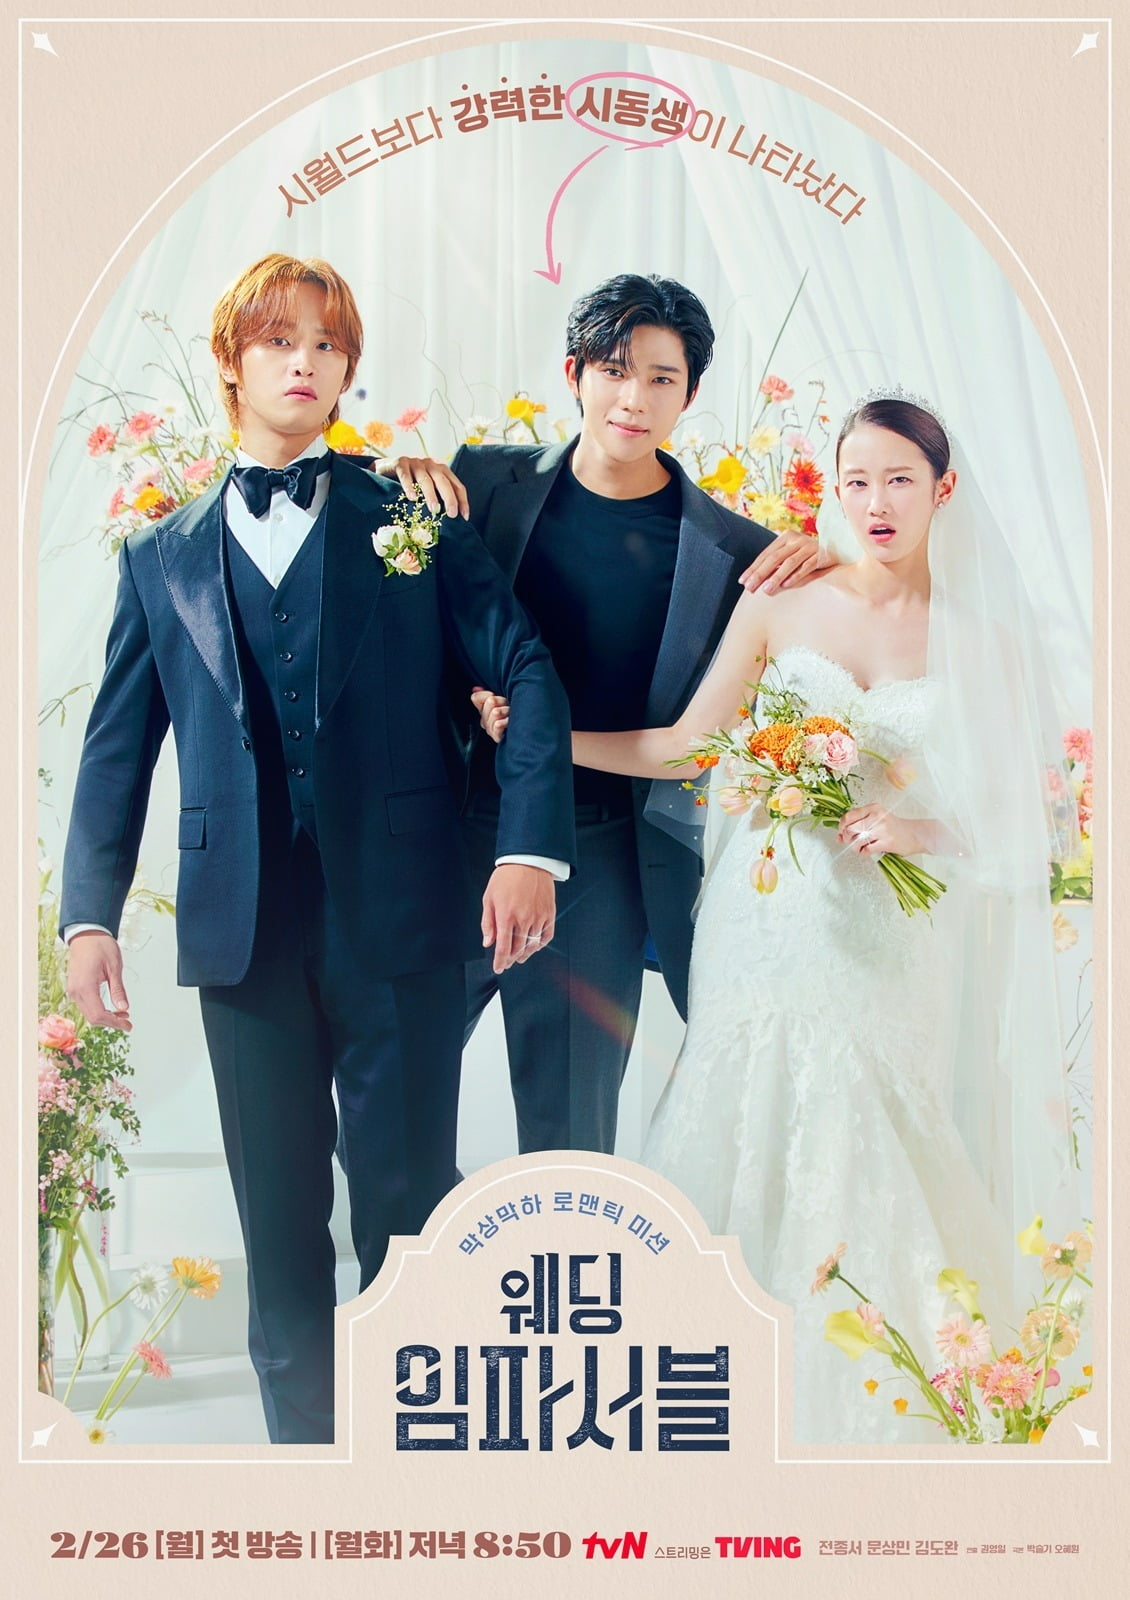 Actors Jeon Jong-seo and Moon Sang-min's drama 'Wedding Impossible' is an untimely surprise.